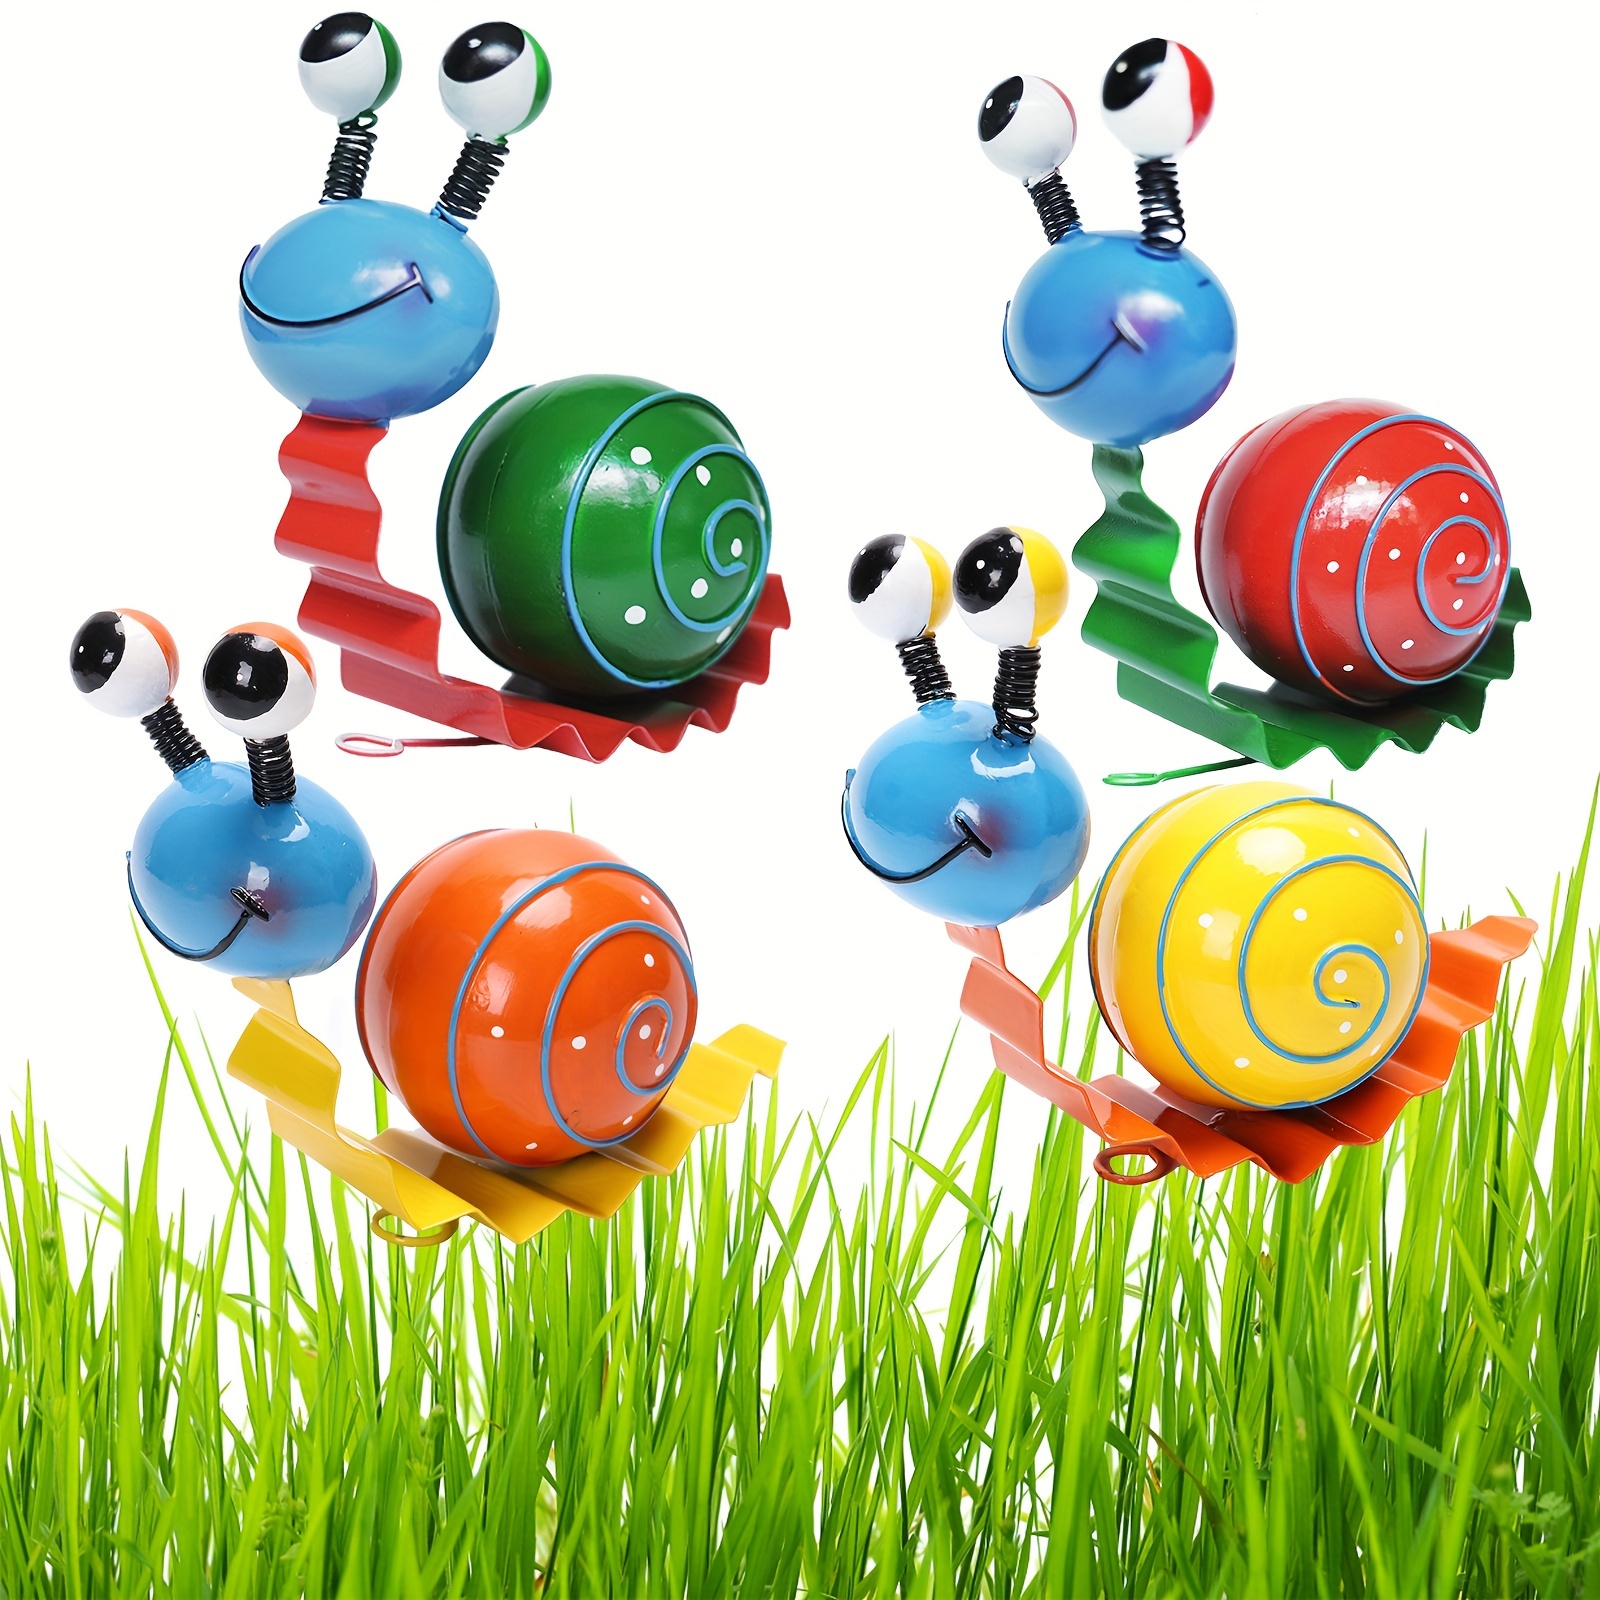 

Metal Yard Art 4 Pcs Cute Snails Garden Decor For Outside Lawn Patio Ornament Fence Decorations - (yellow, Orange, Red, Green)